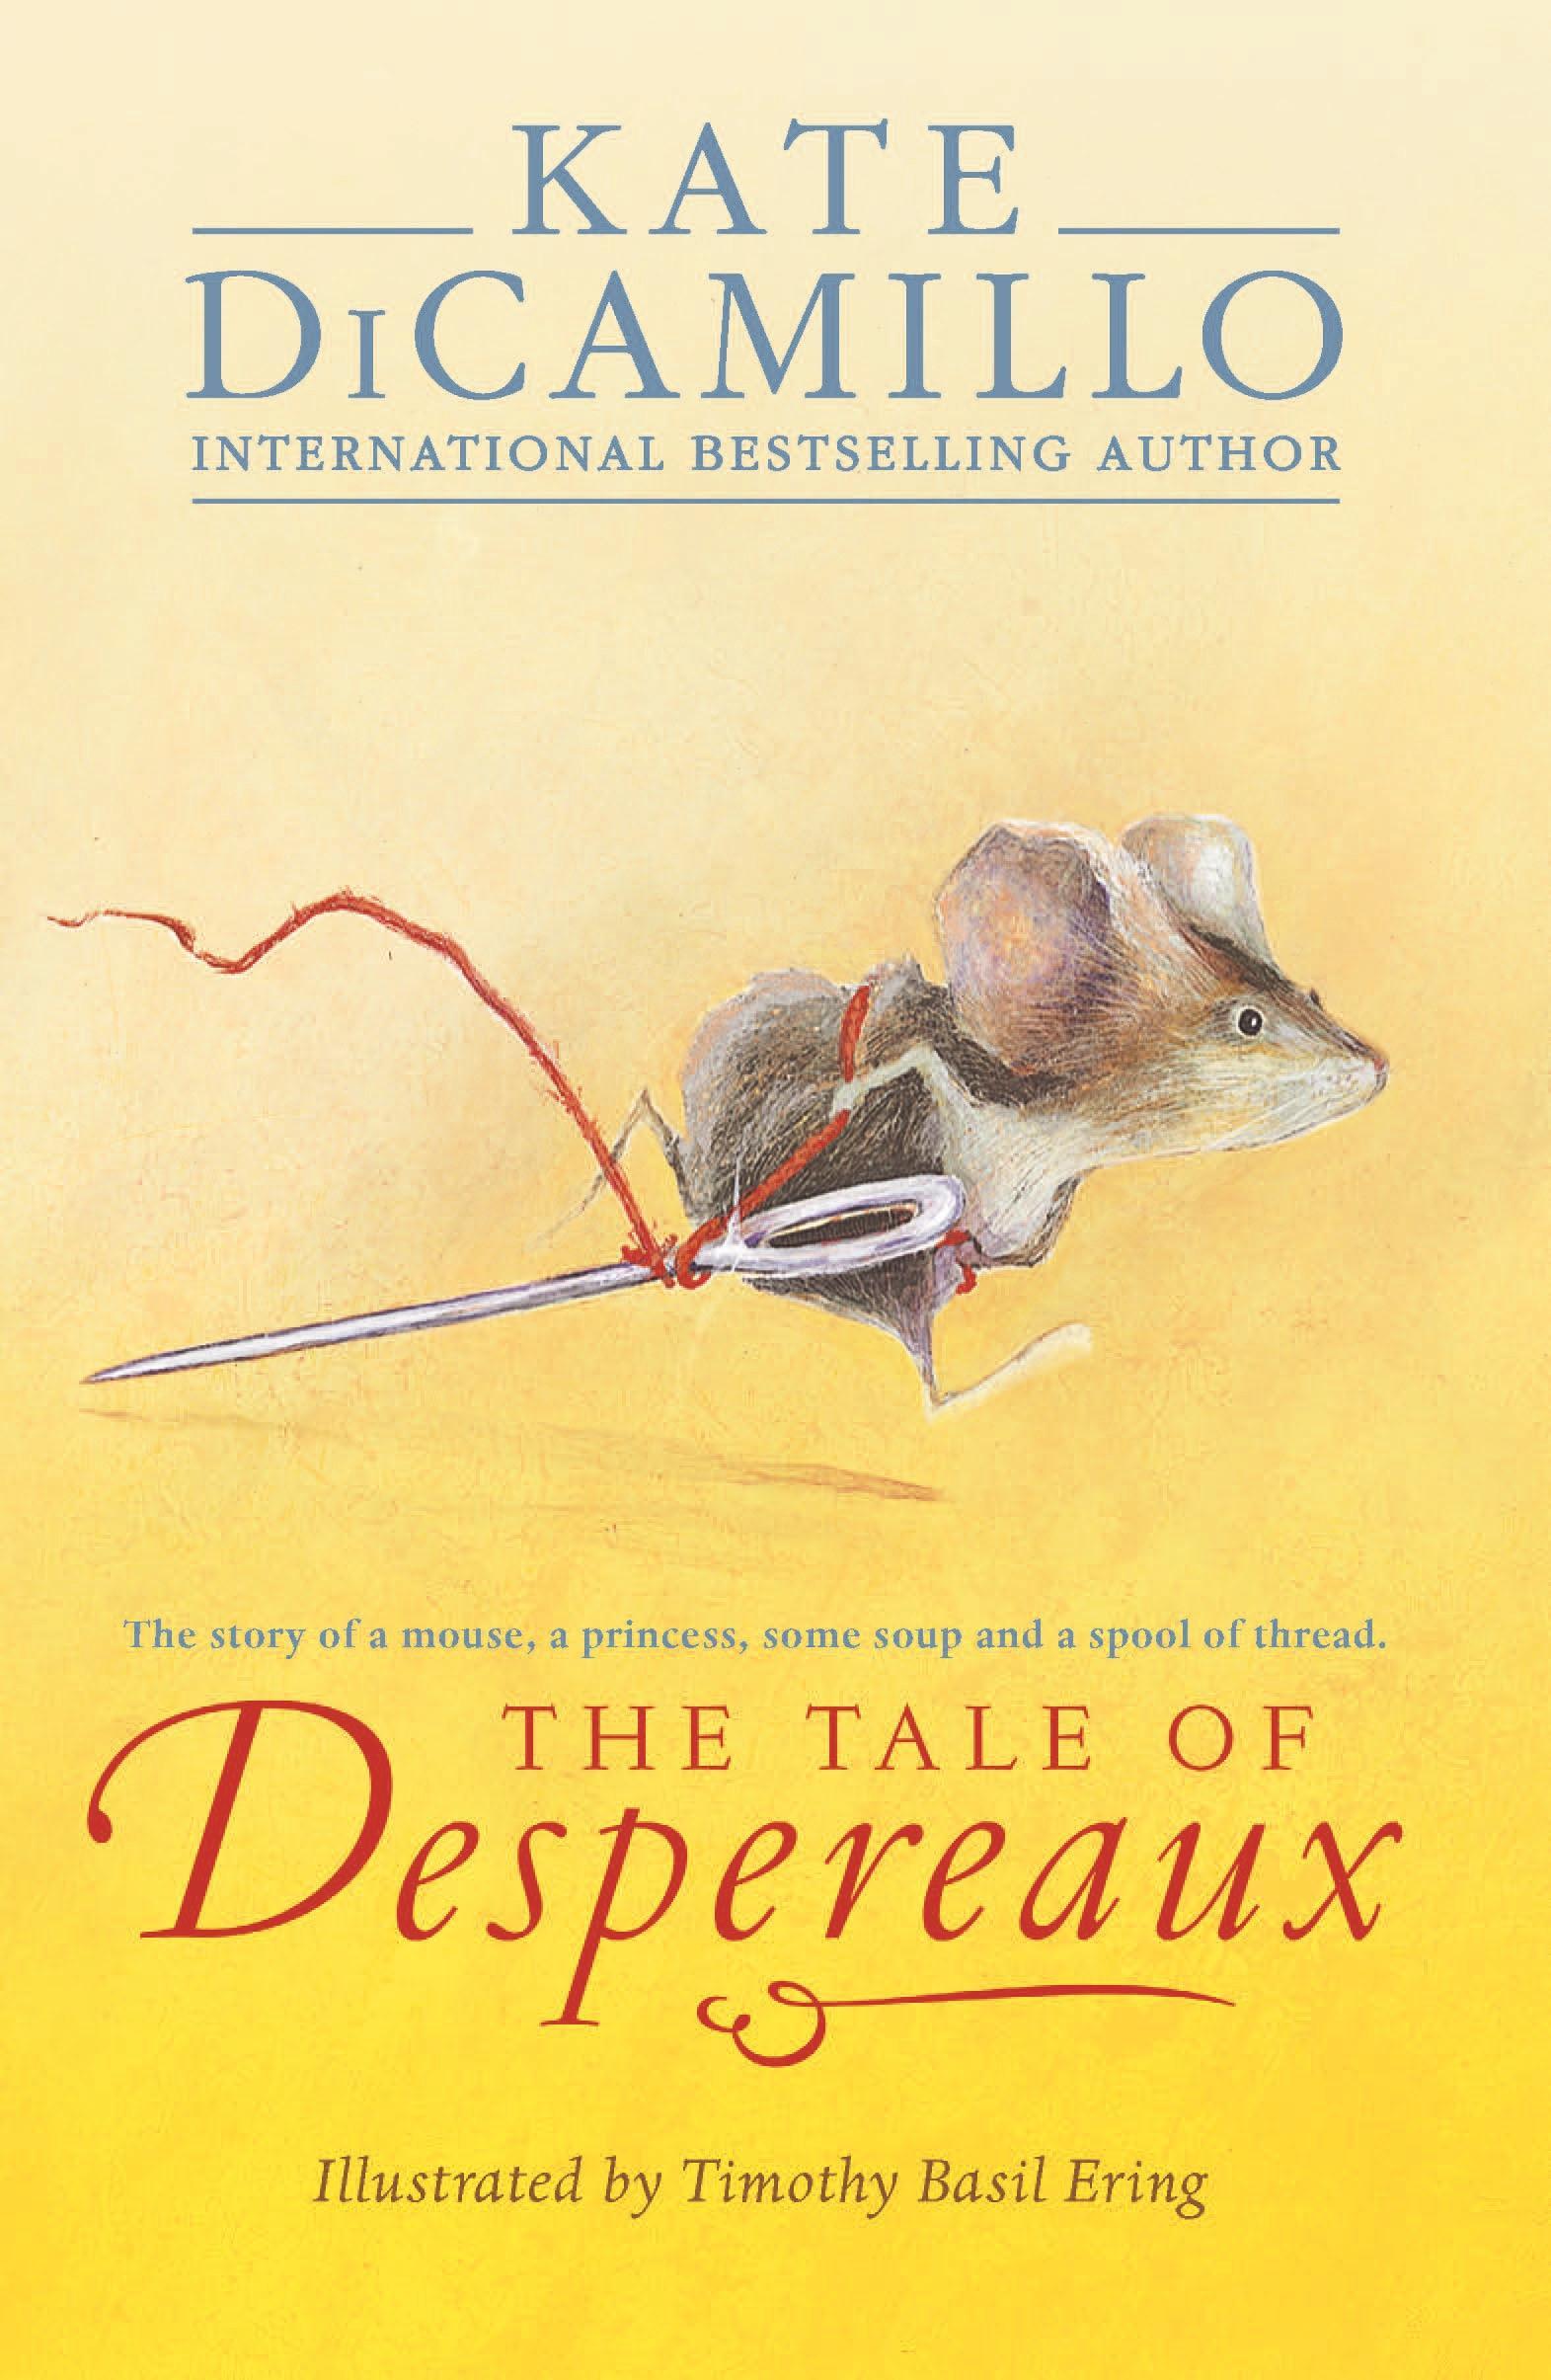 The Tale of Despereaux / Being the Story of a Mouse, a Princess, Some Soup, and a Spool of Thread / Kate DiCamillo / Taschenbuch / 267 S. / Englisch / 2015 / Walker Books Ltd. / EAN 9781844289936 - DiCamillo, Kate